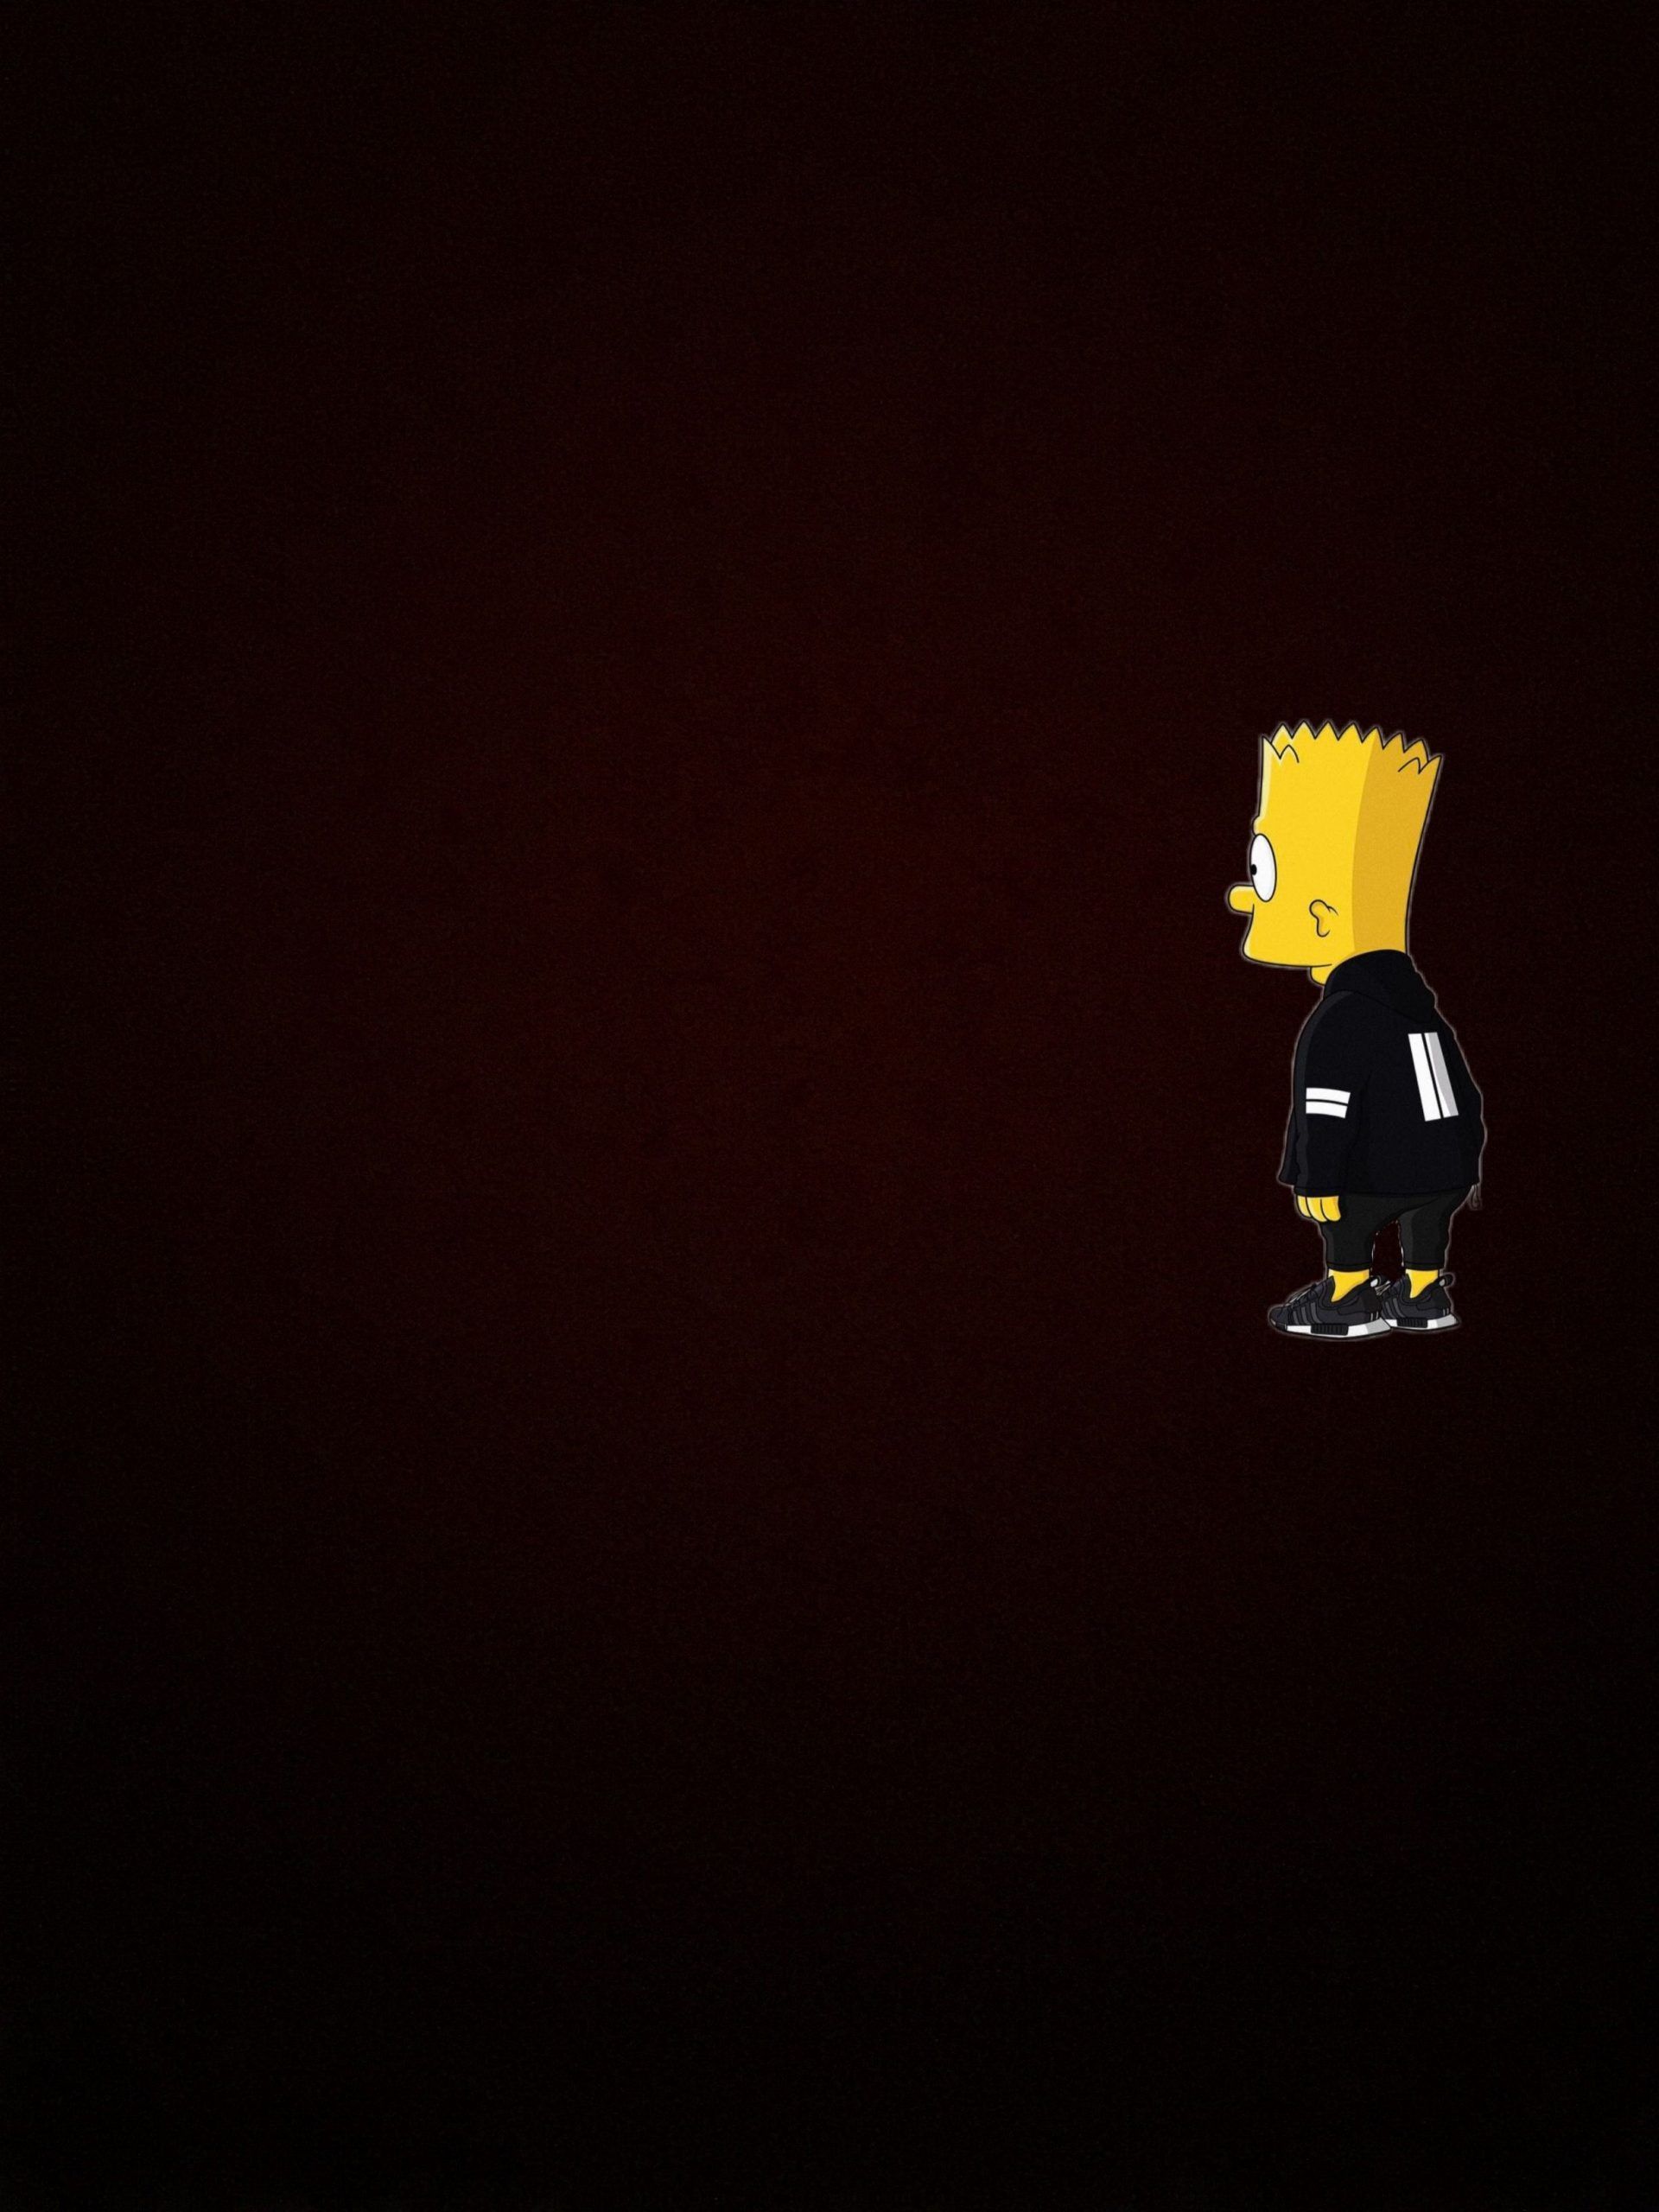 Bart Black Wallpaper iPhone In 2019 Simpson Wallpaper with regard to Brilliant The Simpson. Simpson wallpaper iphone, Art wallpaper iphone, Black wallpaper iphone